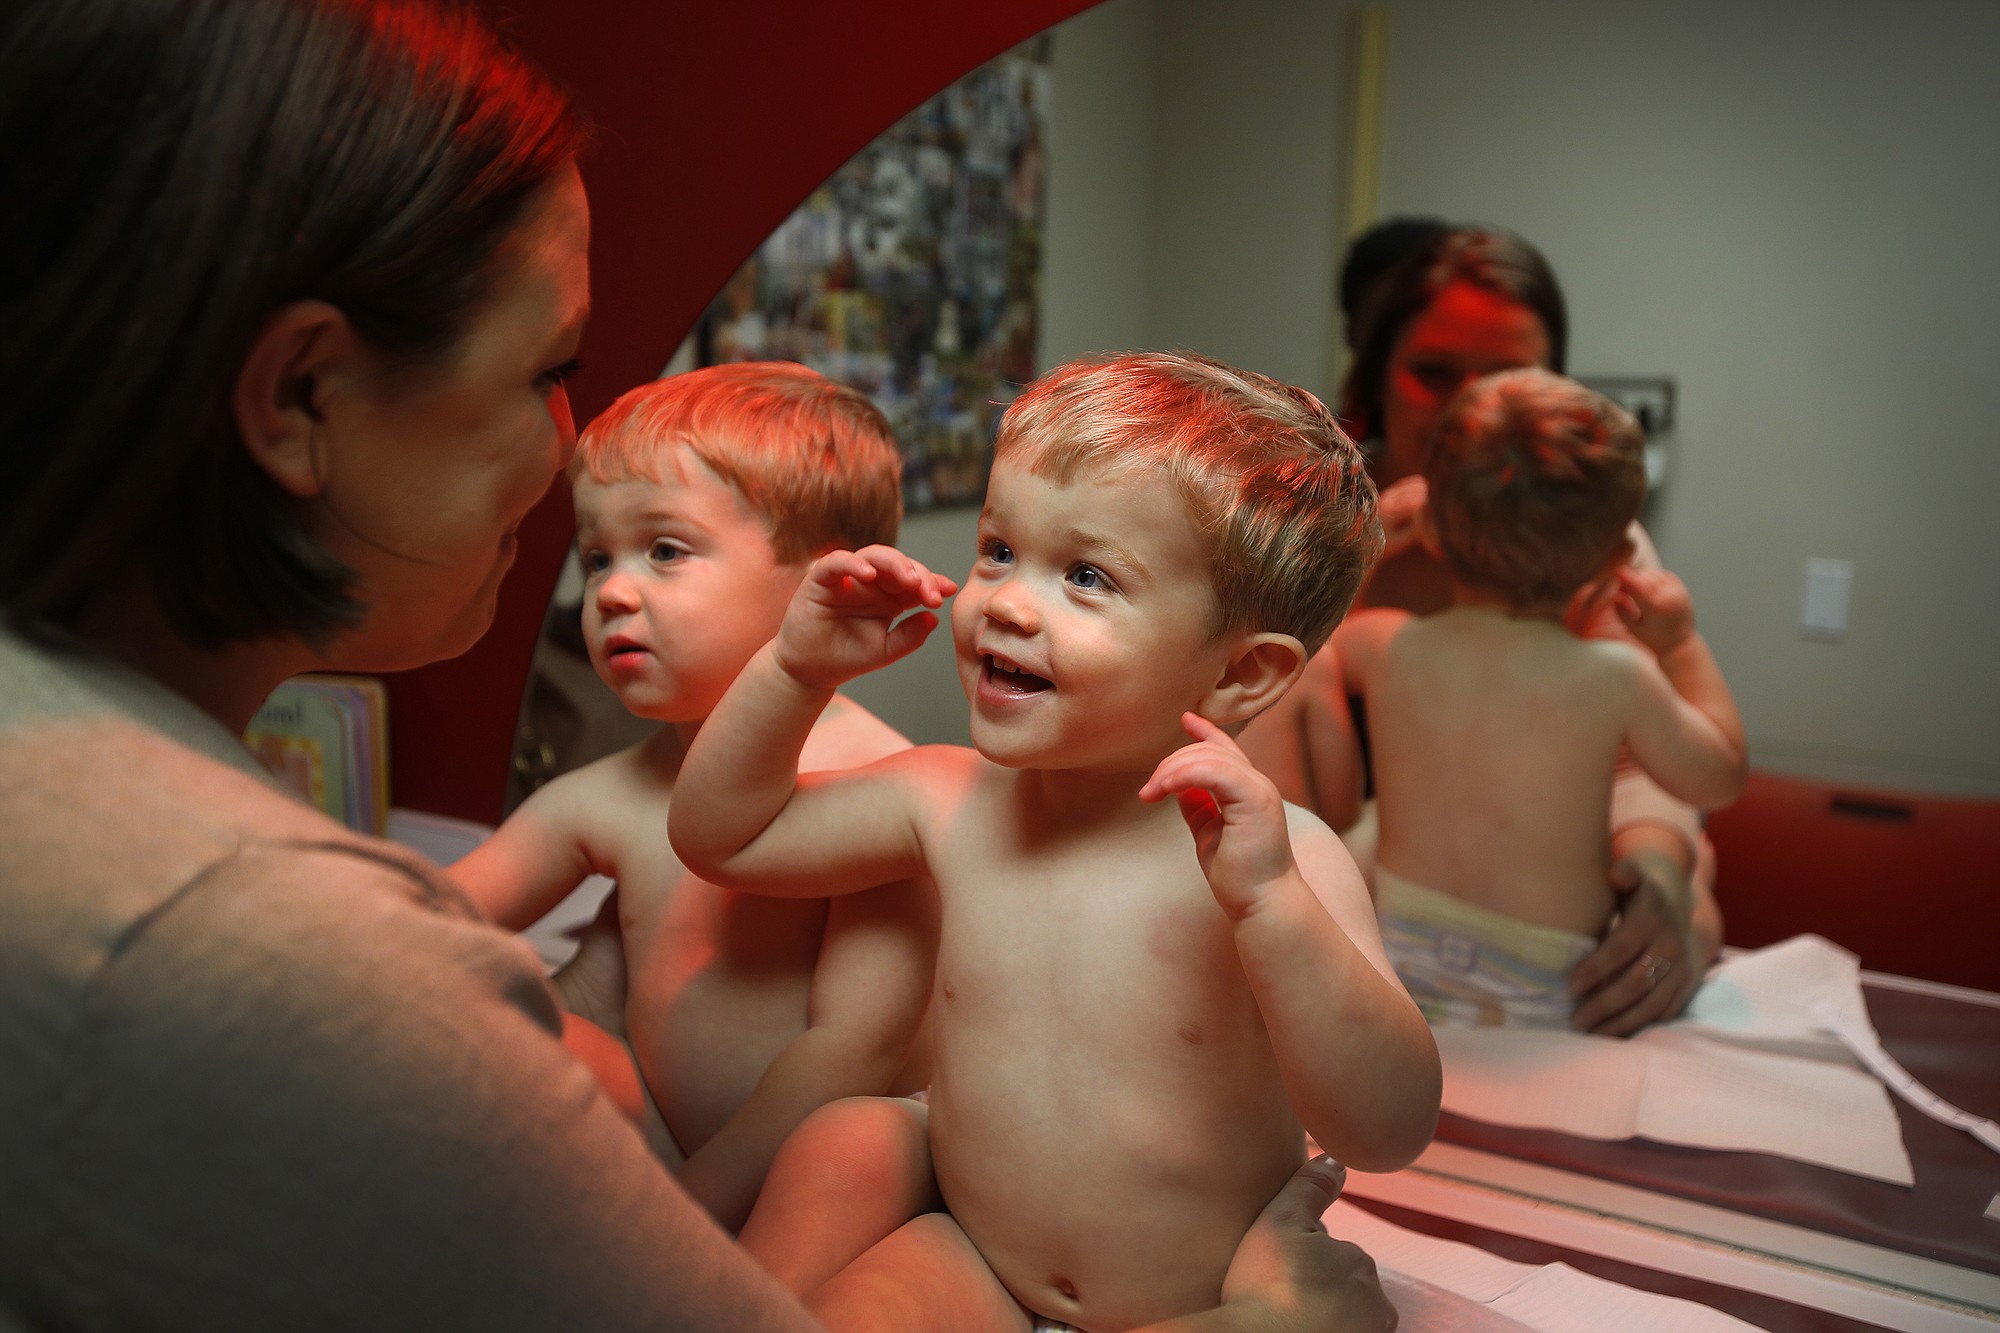 Rachel Gipson, 32, entertains her twin sons, Simon and Henry, age 2, while waiting to be seen by Dr. Lisa Stern, 54, a pediatrician.